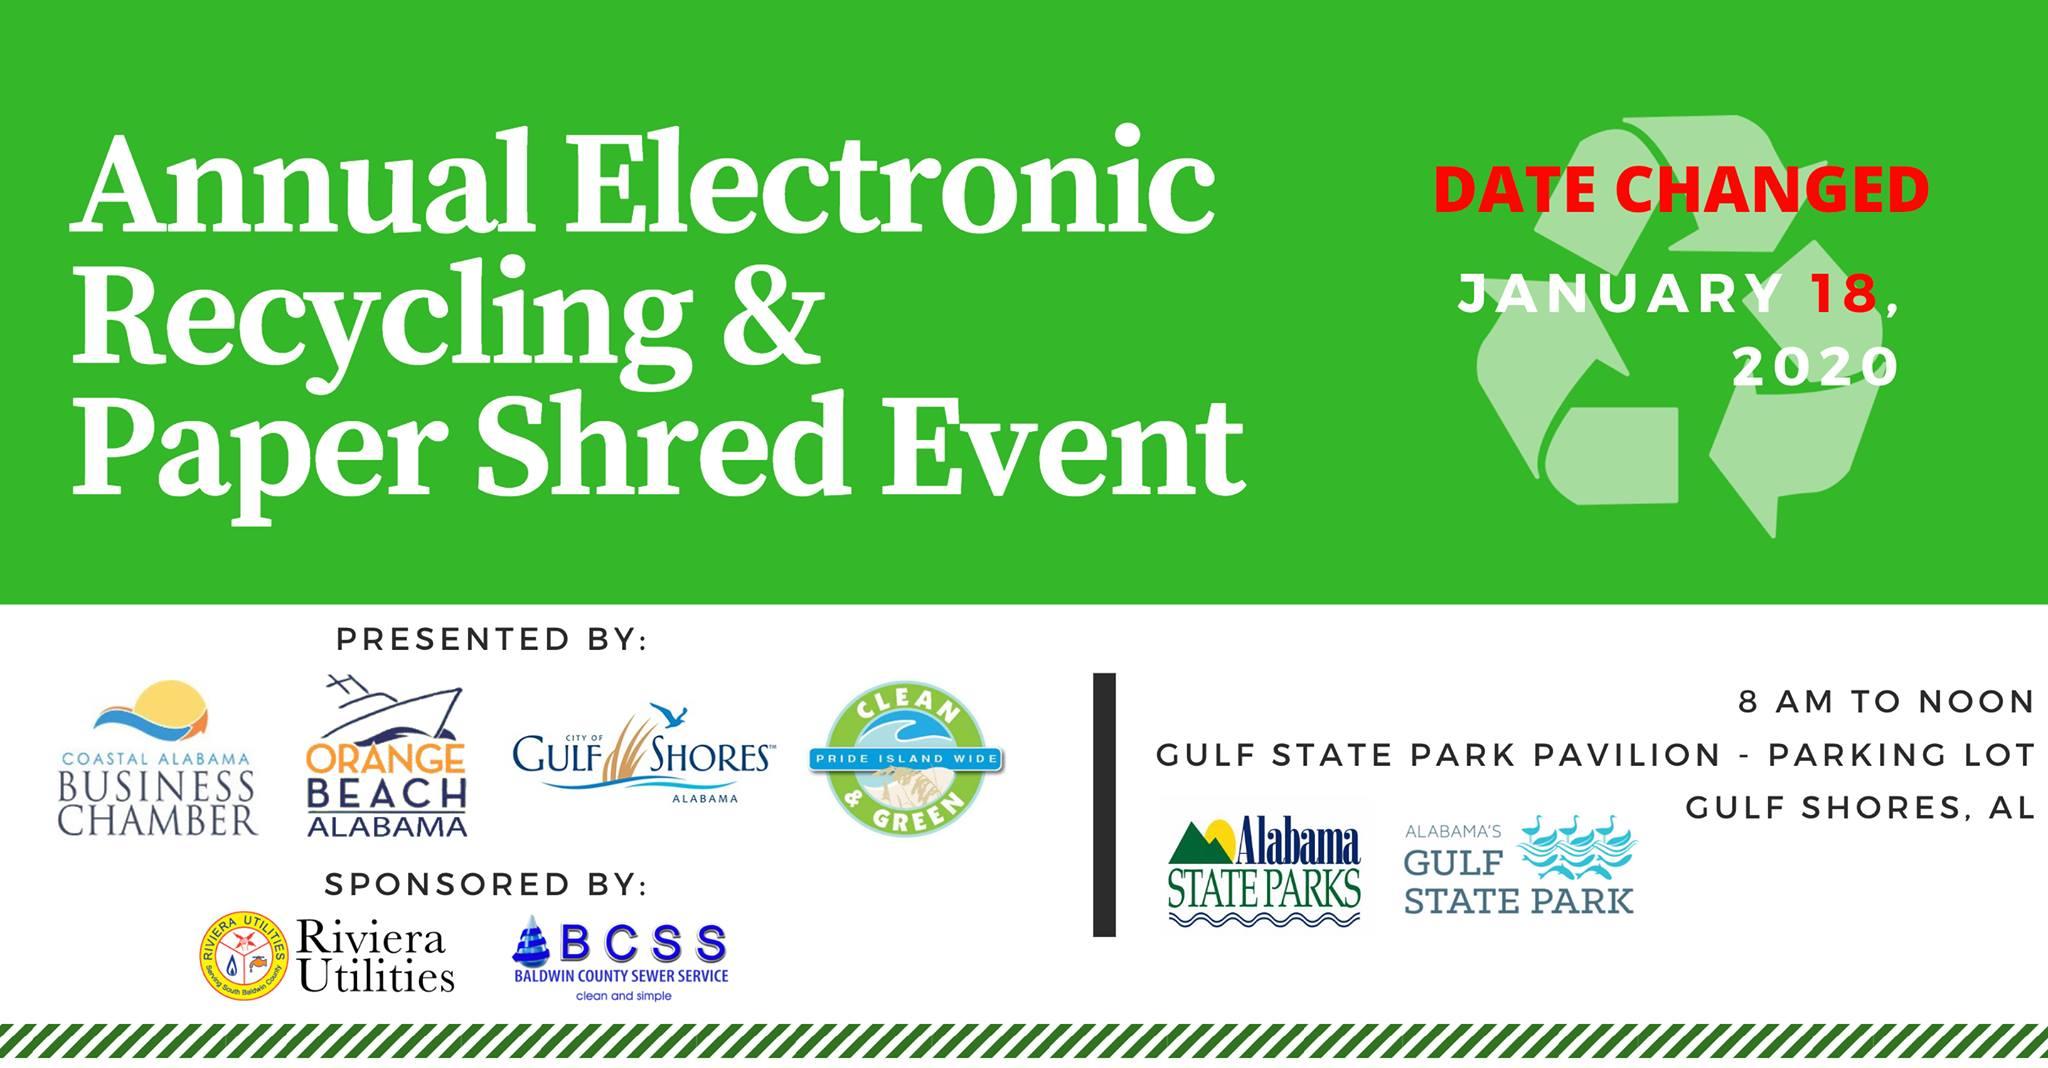 Annual Electronic Recycling and Paper Shred Event